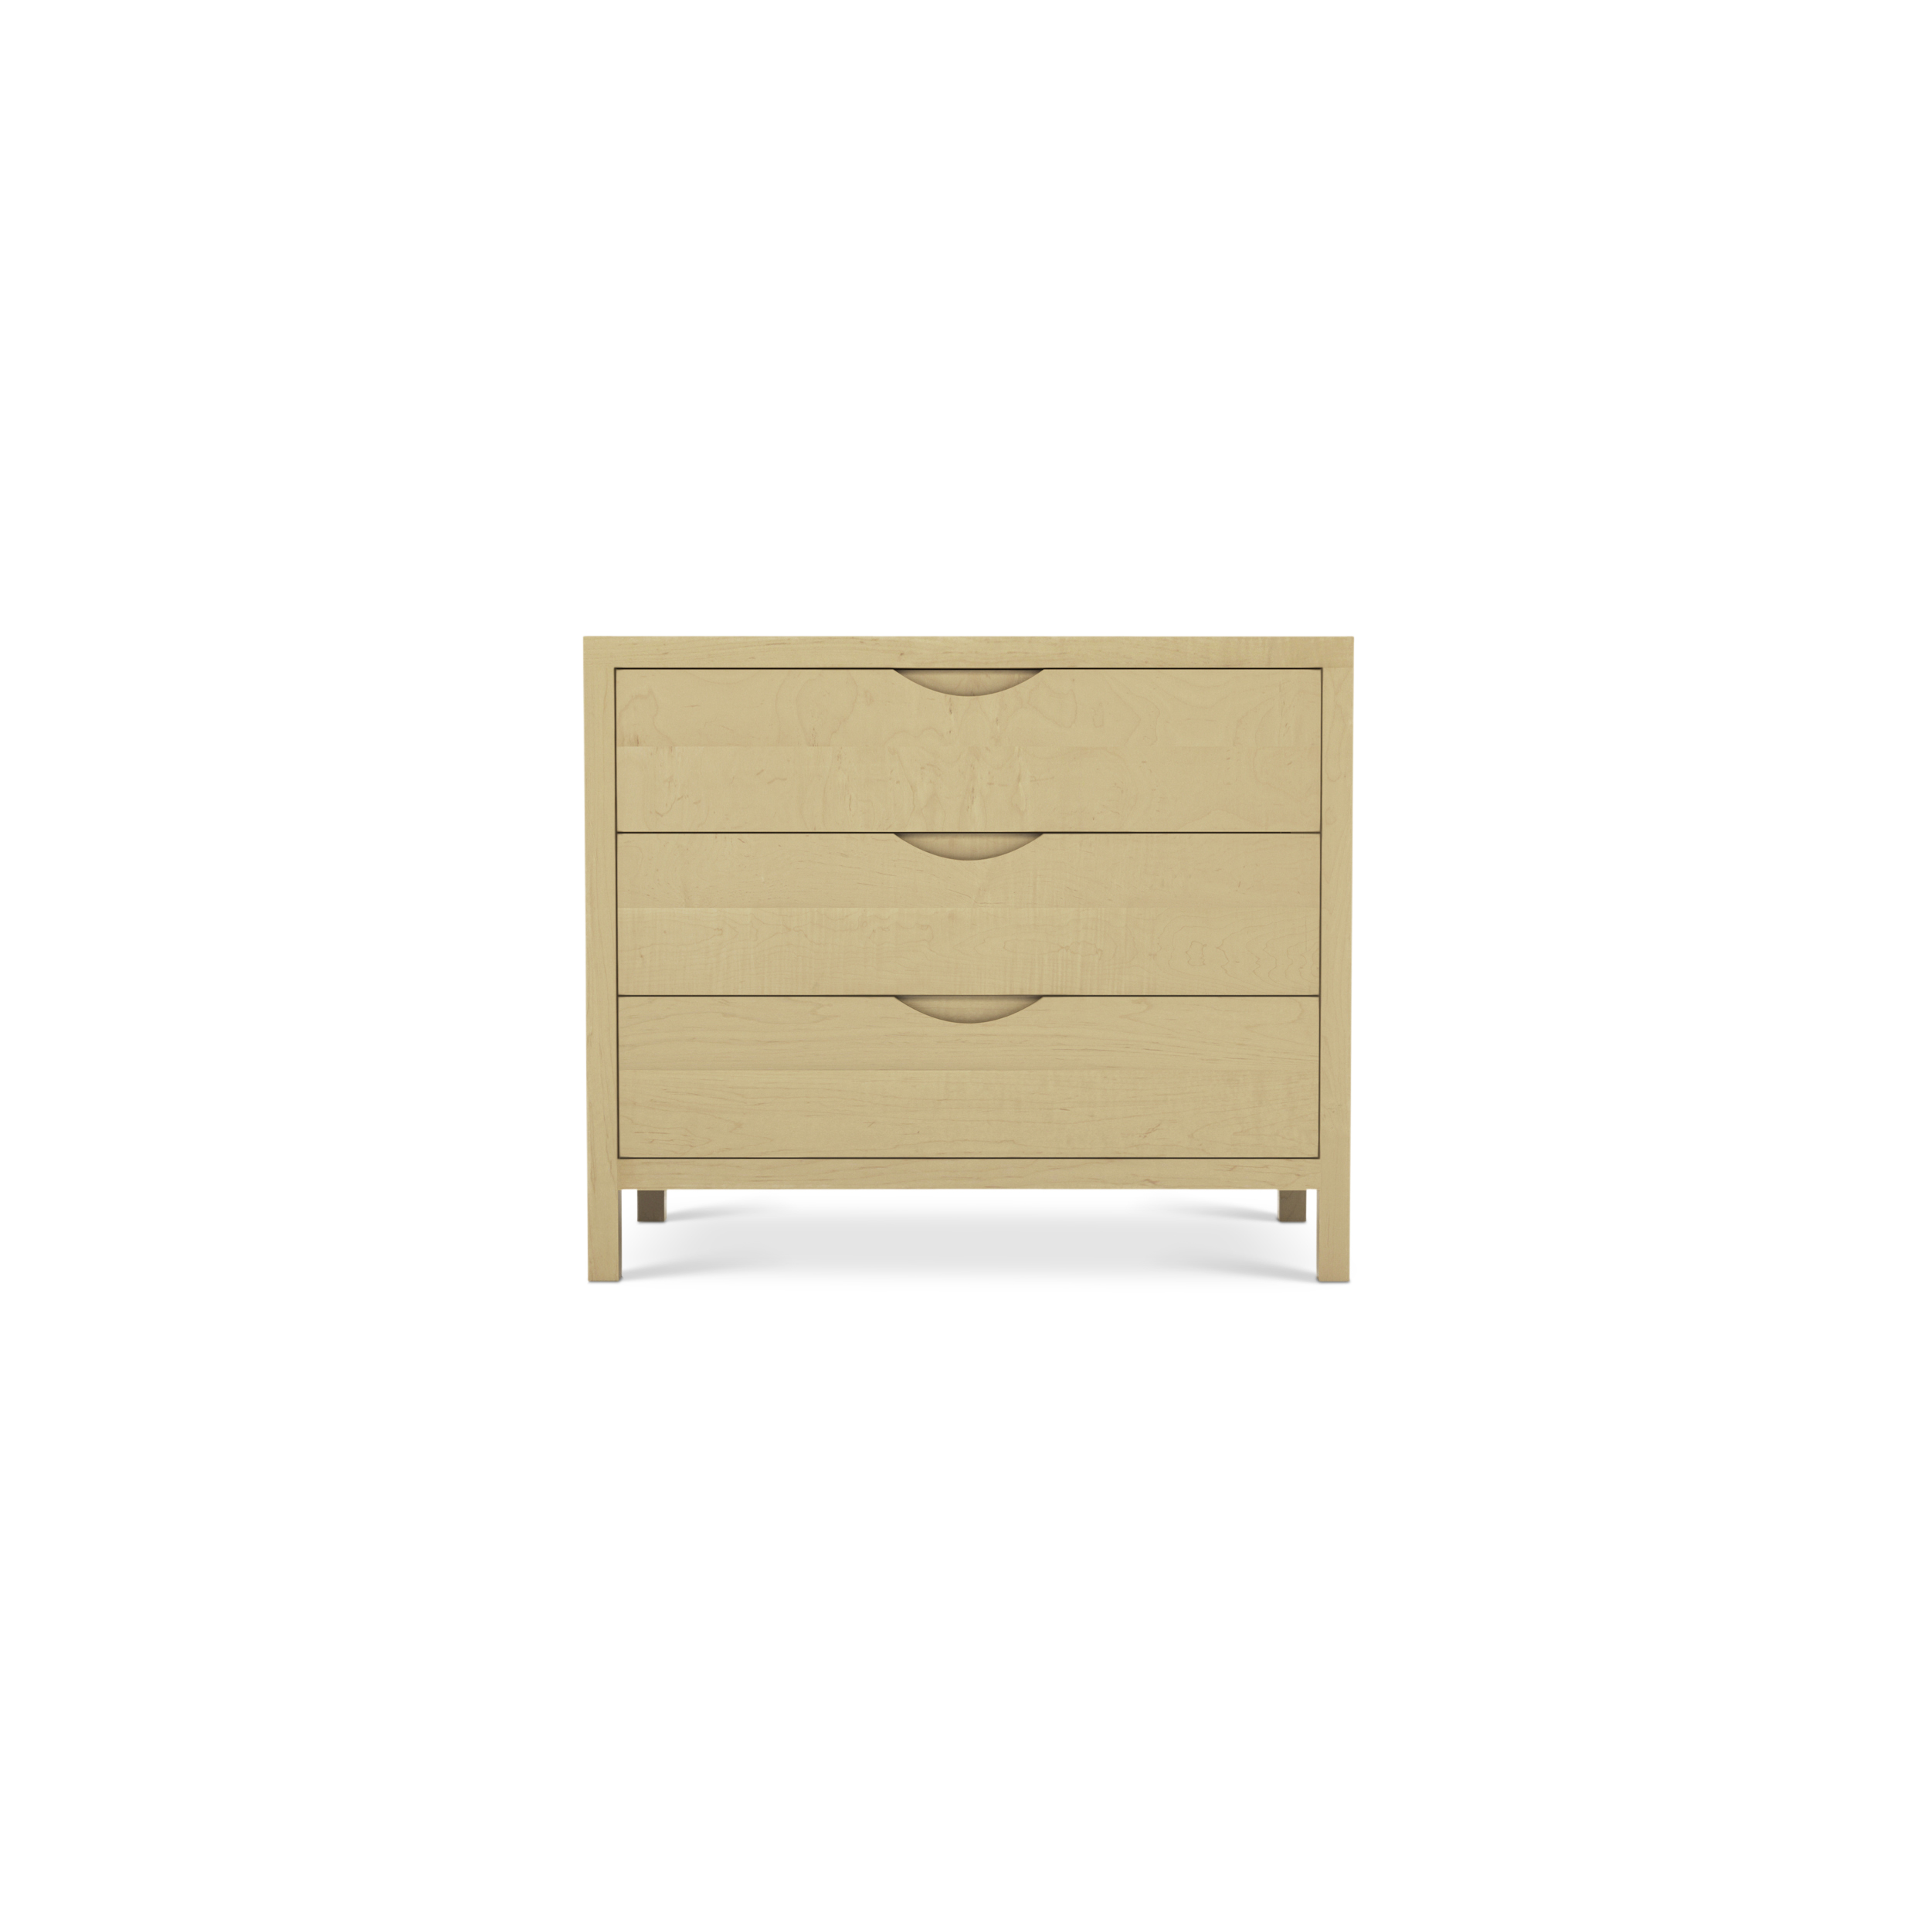 Series 353 Dresser With Three Drawers At 36″ In Width